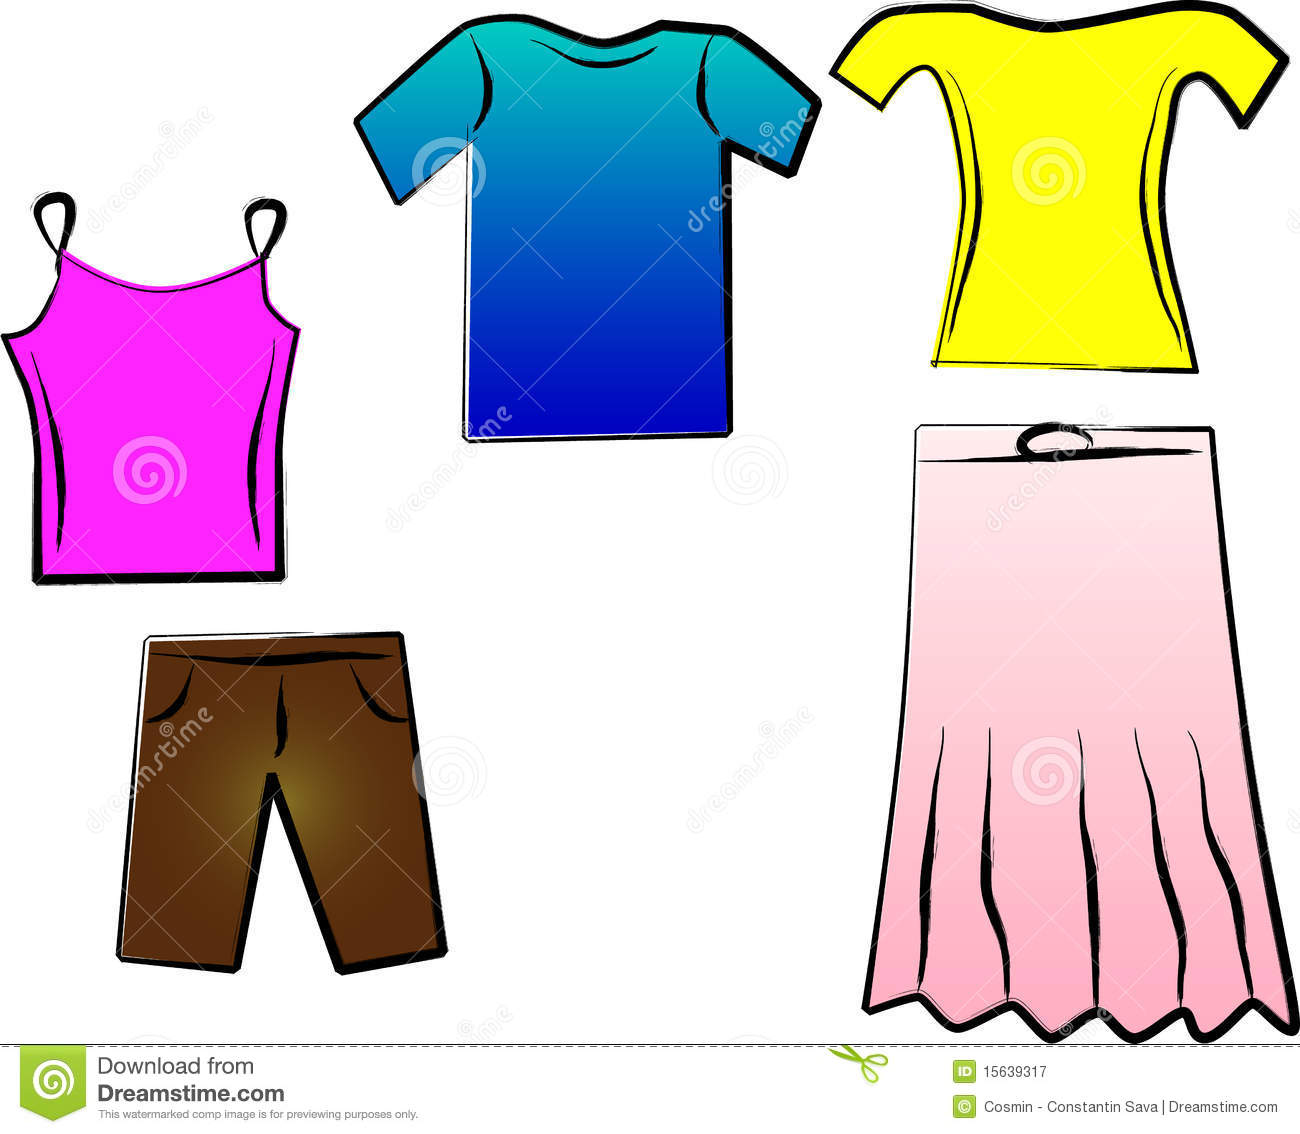 Clothing clipart cotton cloth. Summer clothes free download